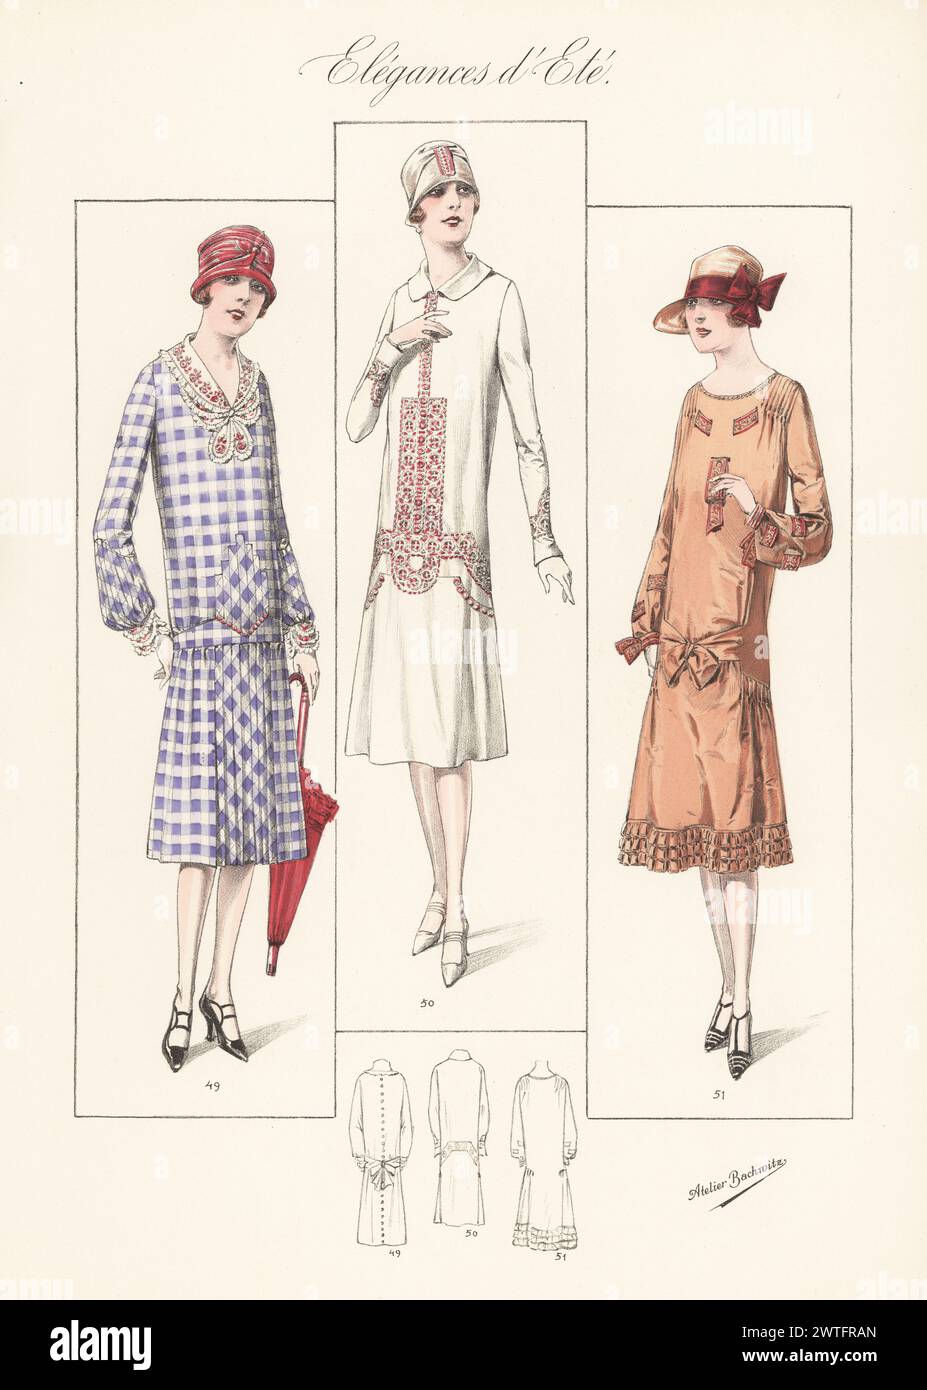 Flappers in summer hats and dresses. Check shantung frock with embroidered collar 49, summer dress in silk rep with embroidery 50, taffetas frock with shoulder pleats 51. Handcoloured lithograph by Atelier Bachwitz from Modell-Kleider fur den Hochsommer, Elegances d’Ete, Fashions for the Hot Season, Atelier Bachwitz AG, Vienna, 1926. Stock Photo